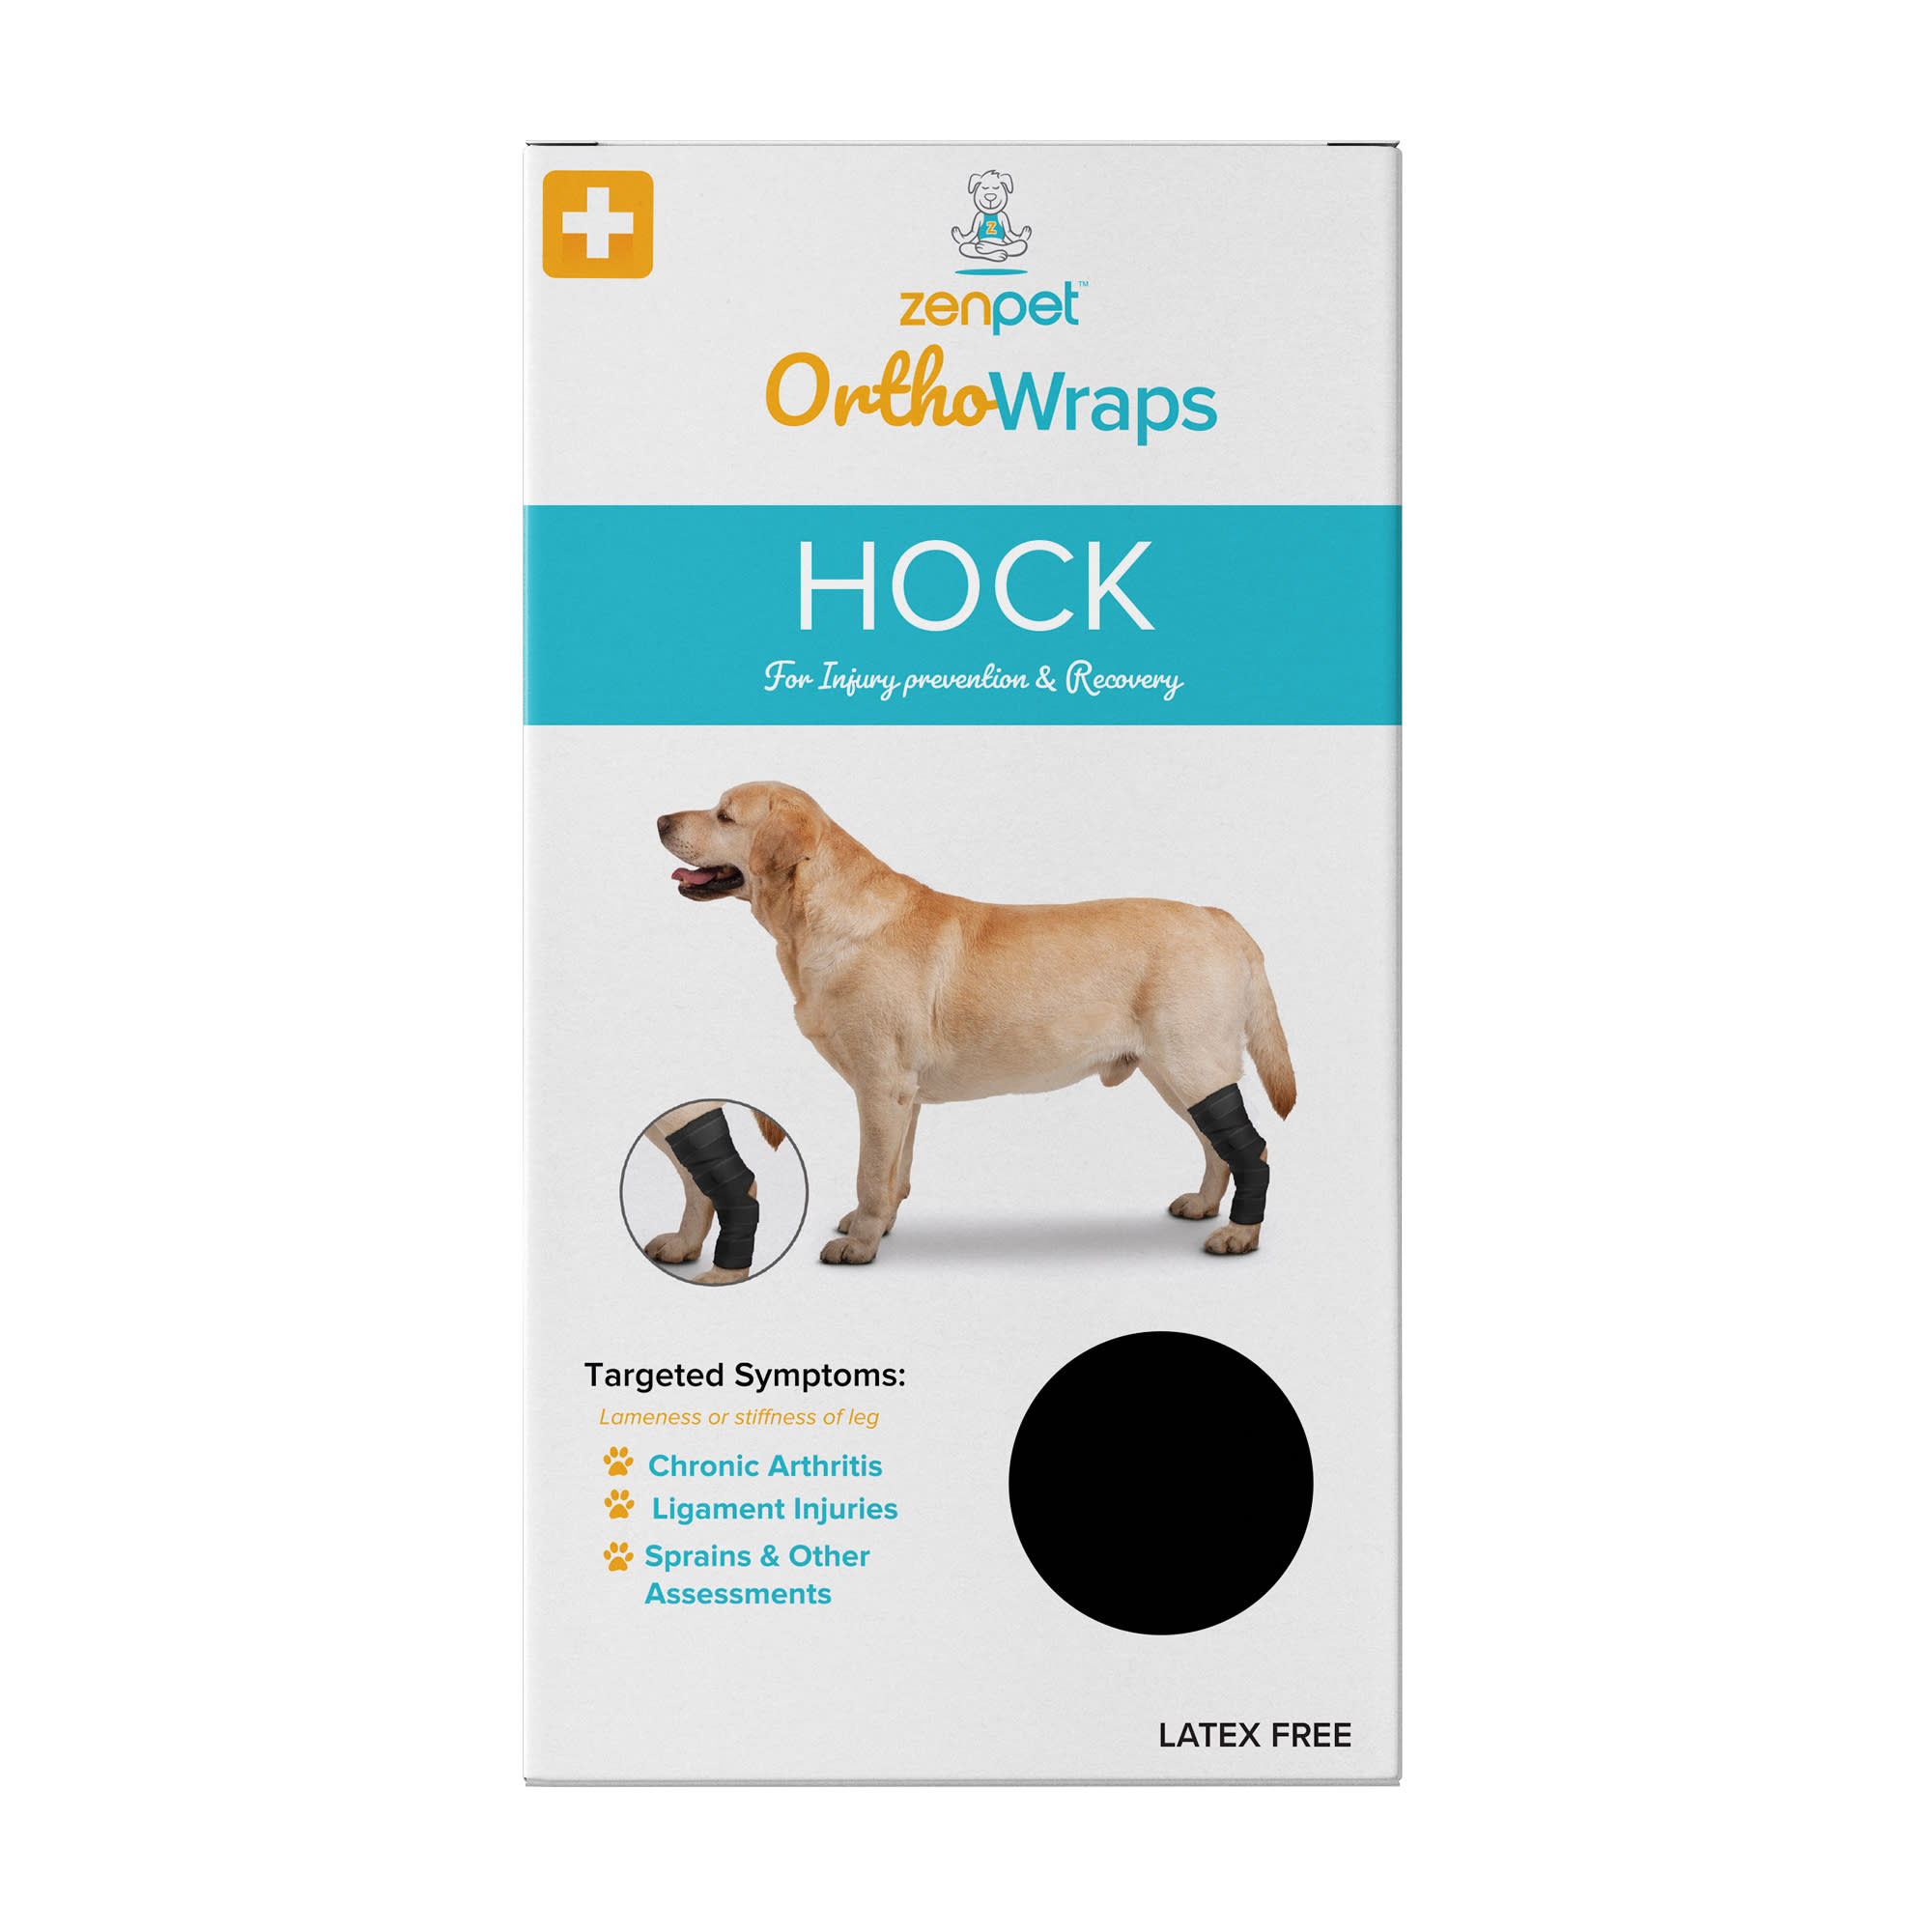 ZenPet OrthoWrap Hock Latex-Free Compression Wrap for Dogs, Medium